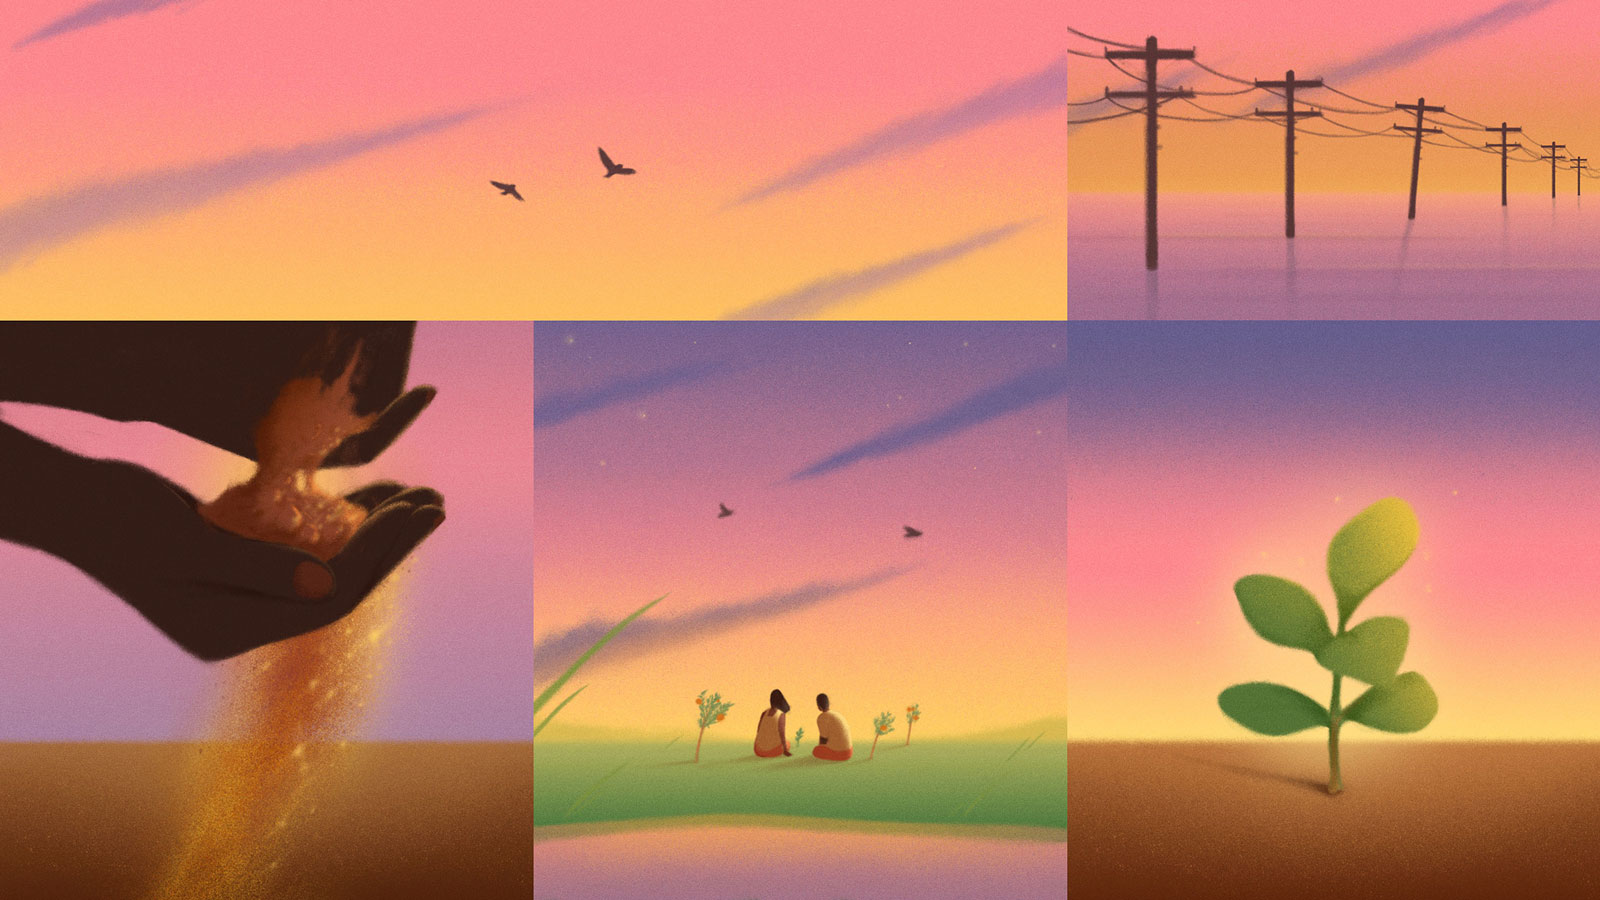 Illustration made up of sunset scenes depicting a flood, birds in sky, hands holding soil, a brother and sister sitting in grass, and a seedling popping out of the ground.